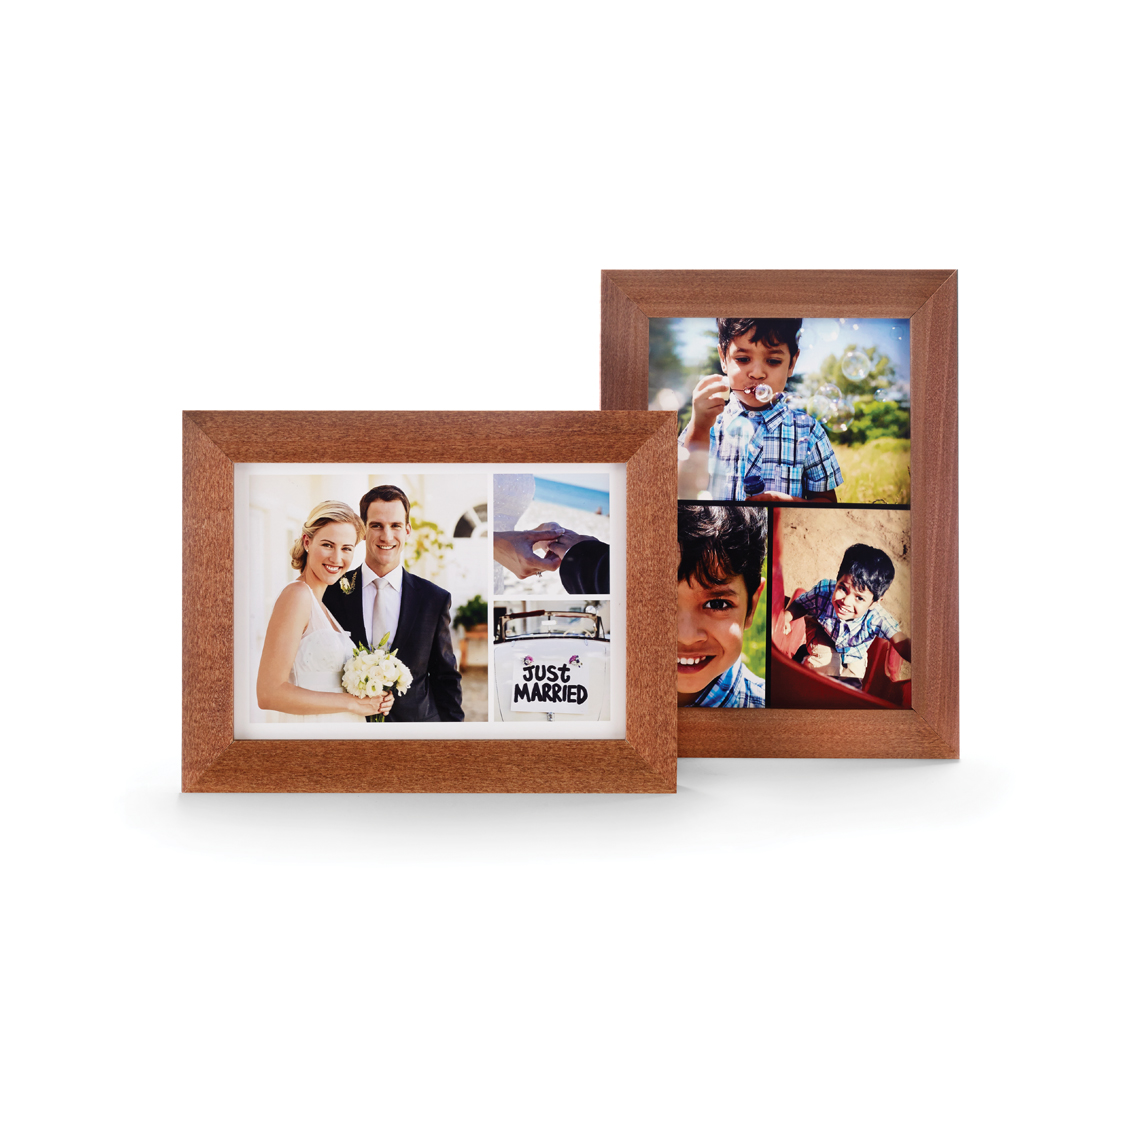 Free 8×10 collage print from CVS Photo